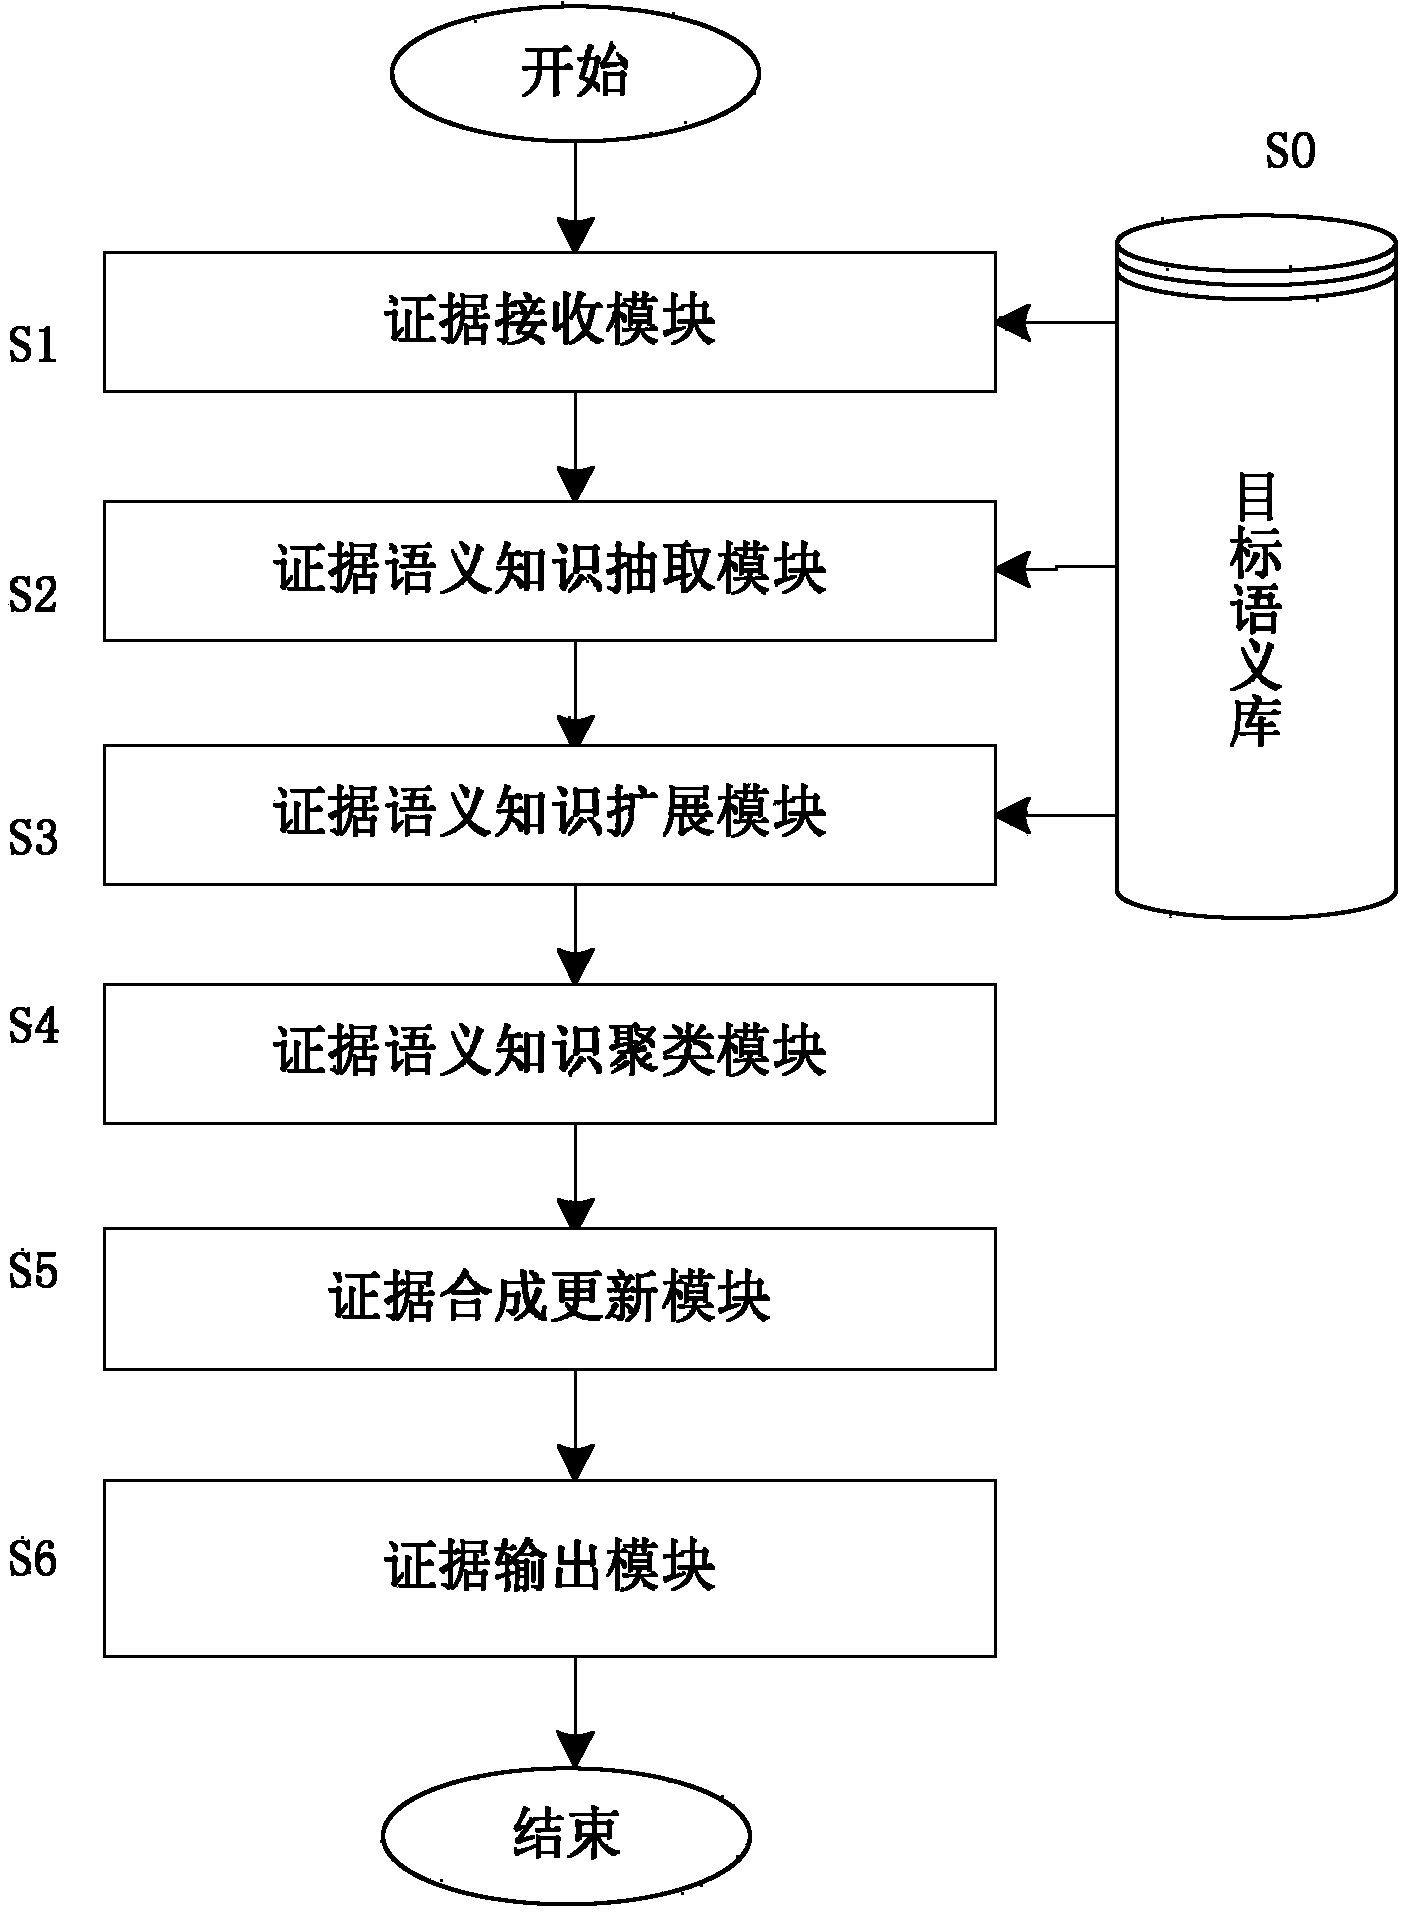 Semantic network object identification and judgment method